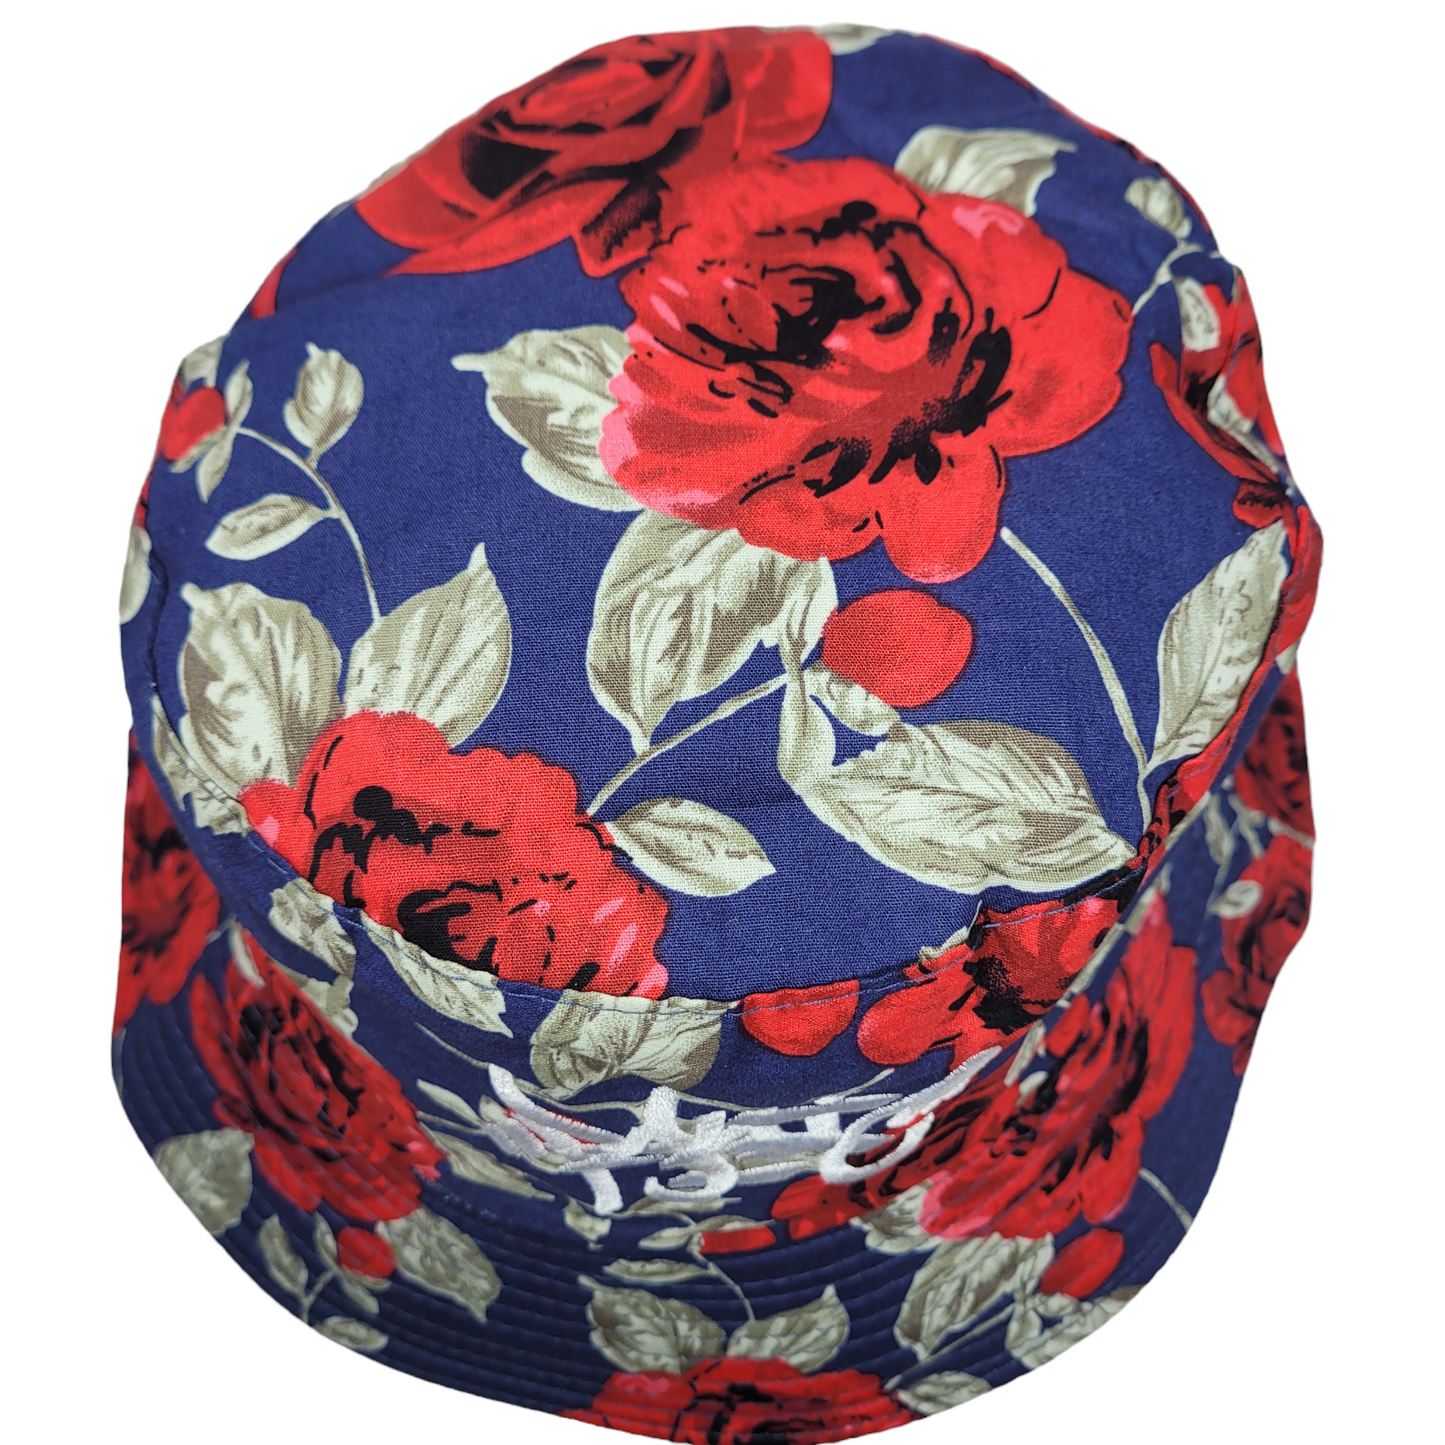 THE ROSES FLORAL BUCKET HAT IN NAVY BLUE